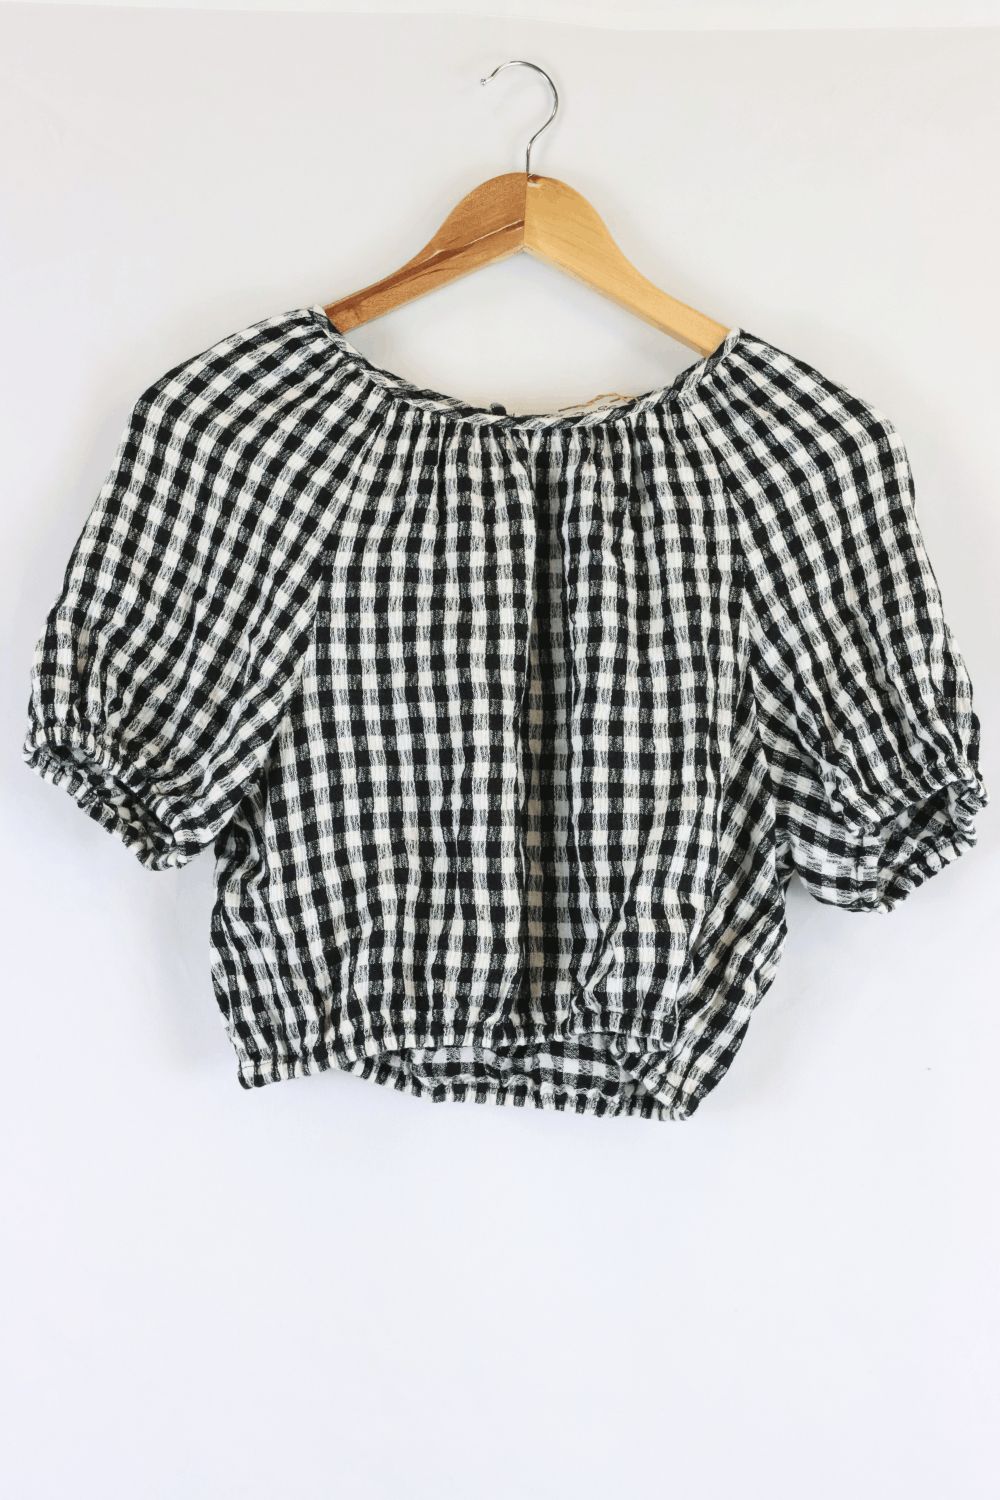 Miss shop Black And White Top S